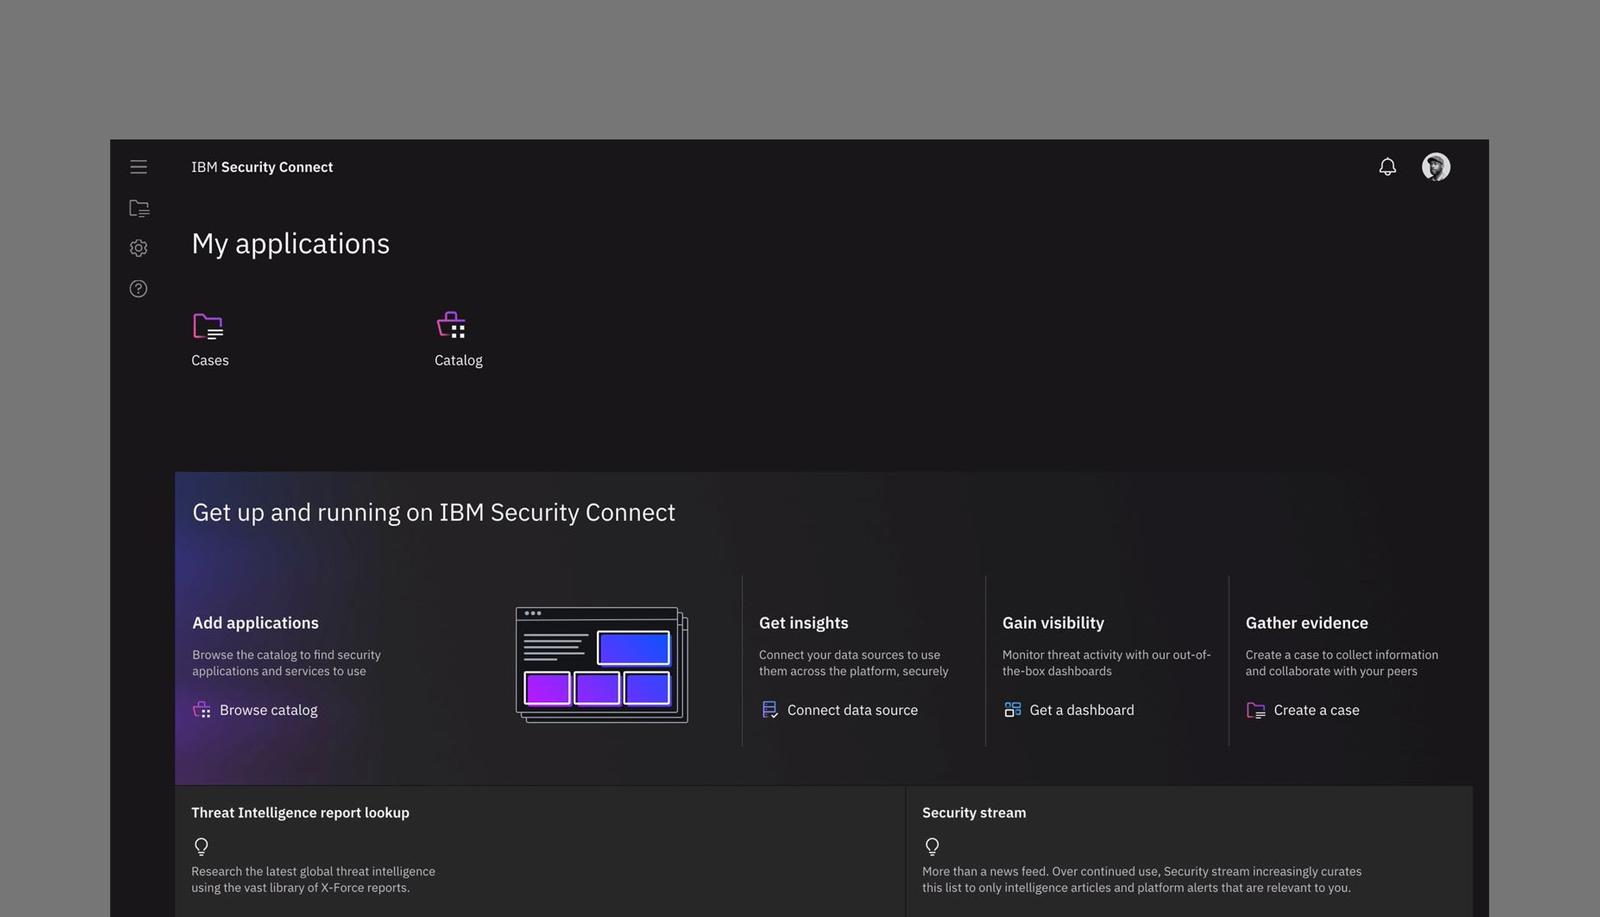 IBM Security Connect - My applications interface.